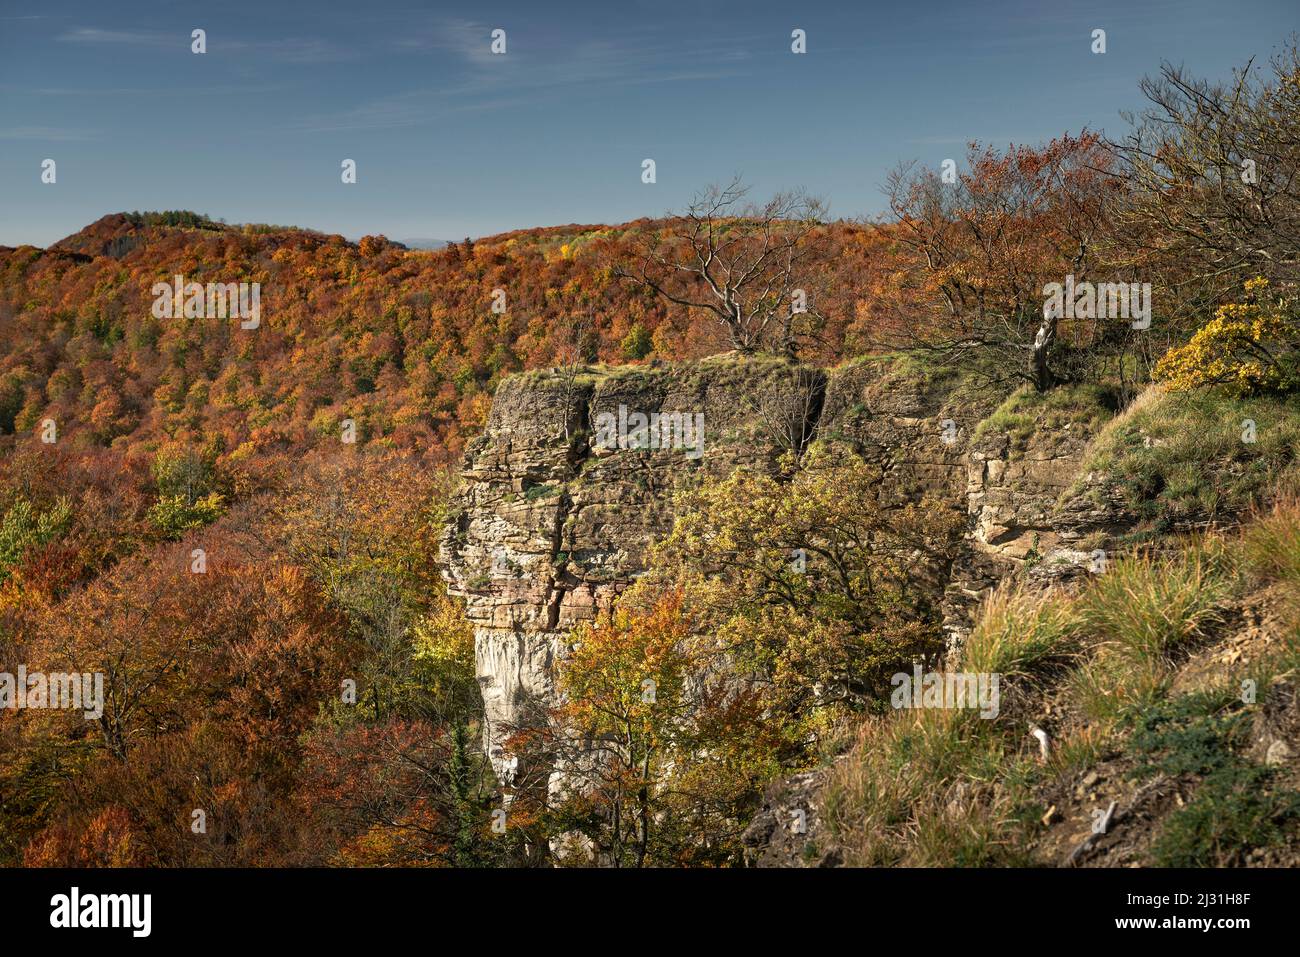 Cliffs of the Hohenstein, Weserbergland, Hessisch Oldendorf, Lower Saxony, Germany, Europe Stock Photo